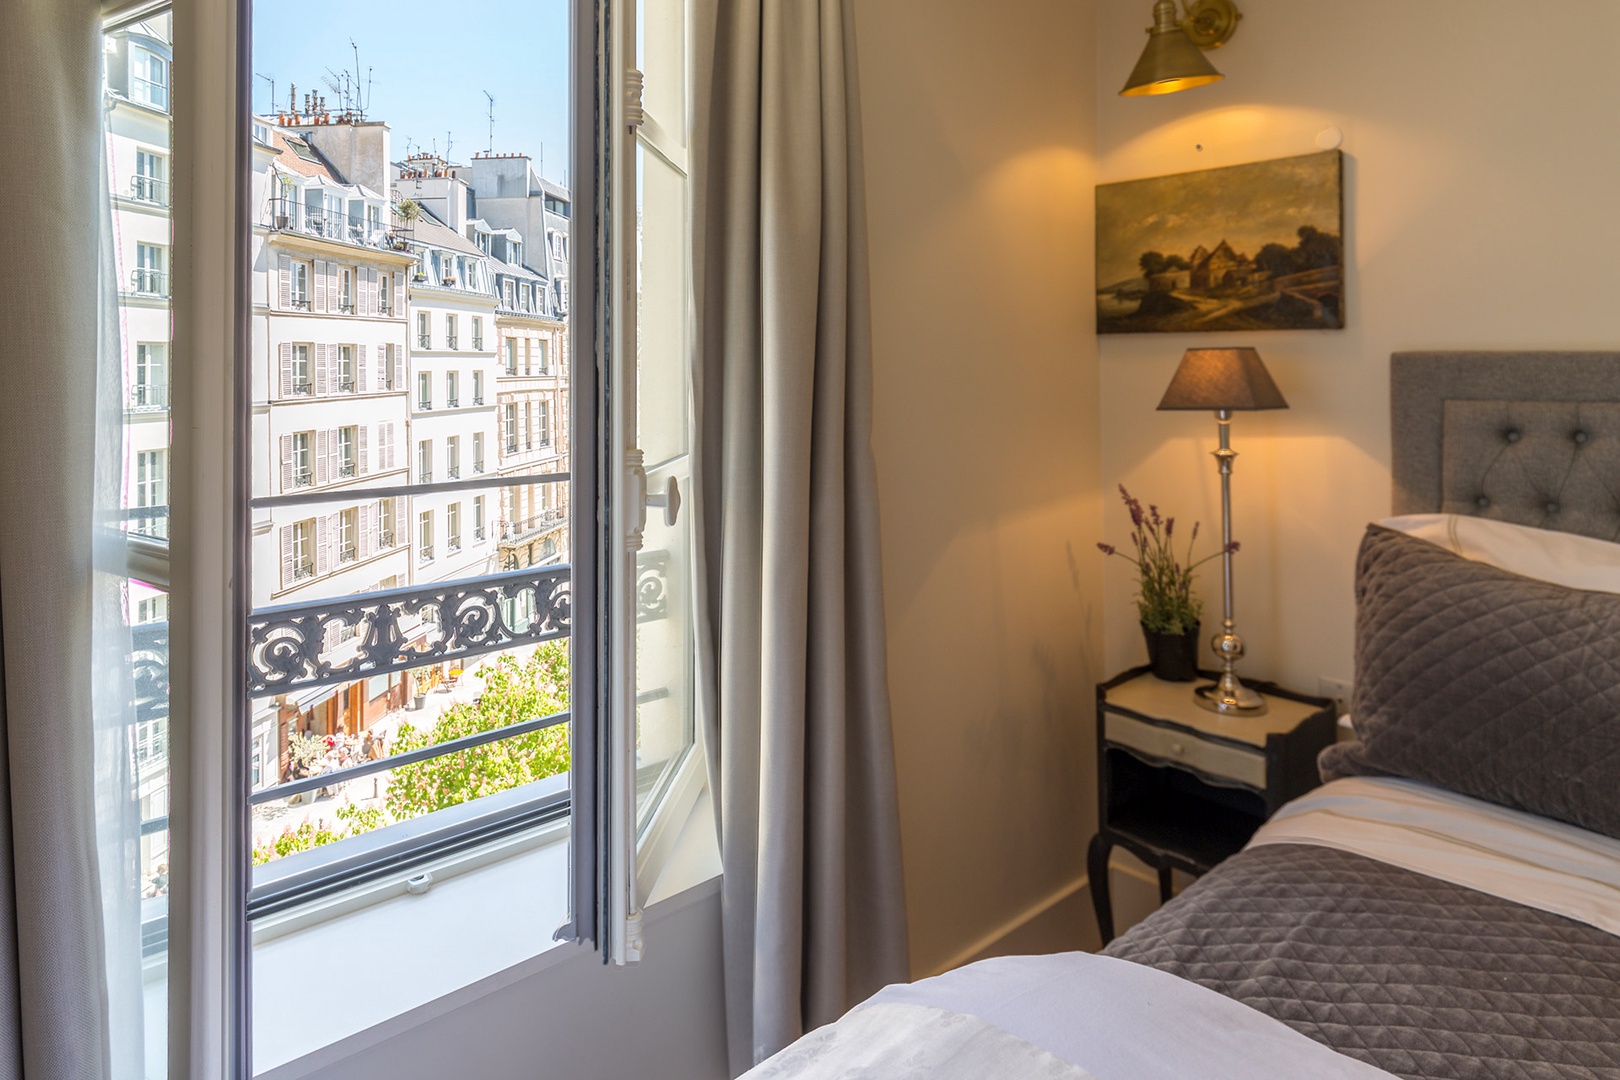 Wake up to the most stunning view over Place Dauphine.